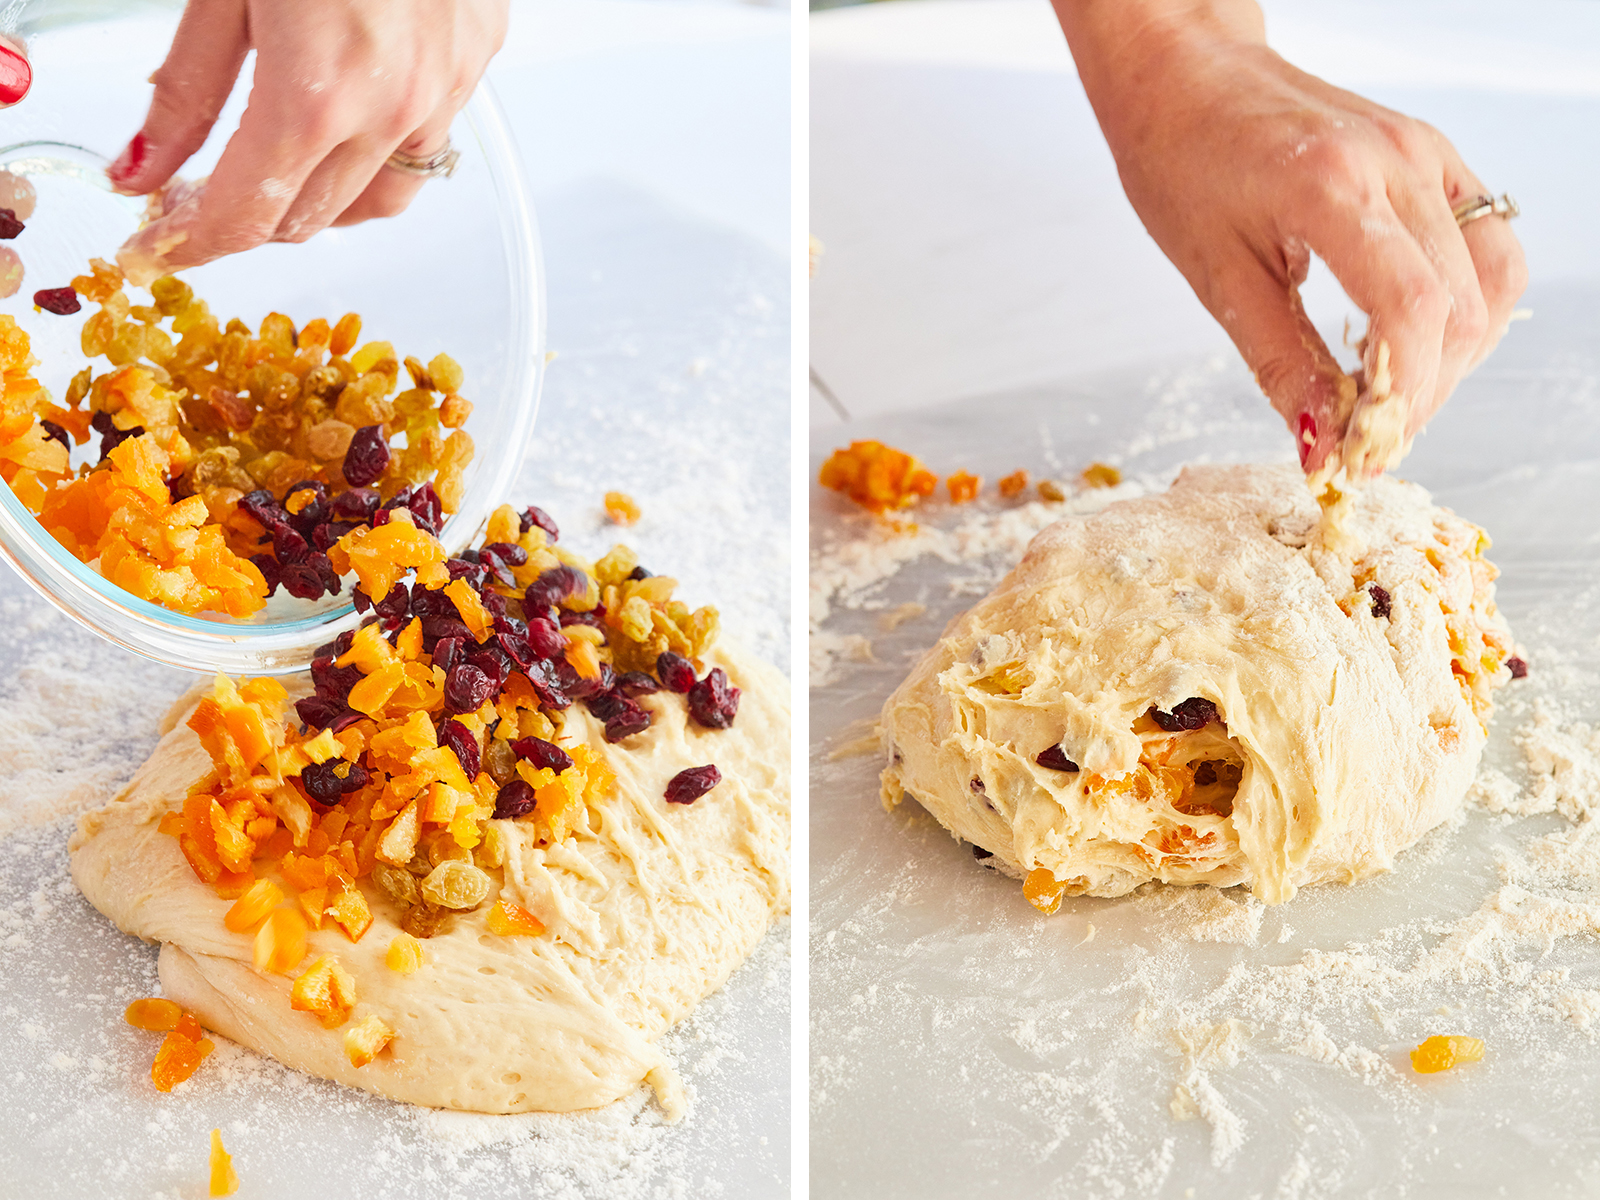 Adding the fruit and mixed peel to Panettone dough.